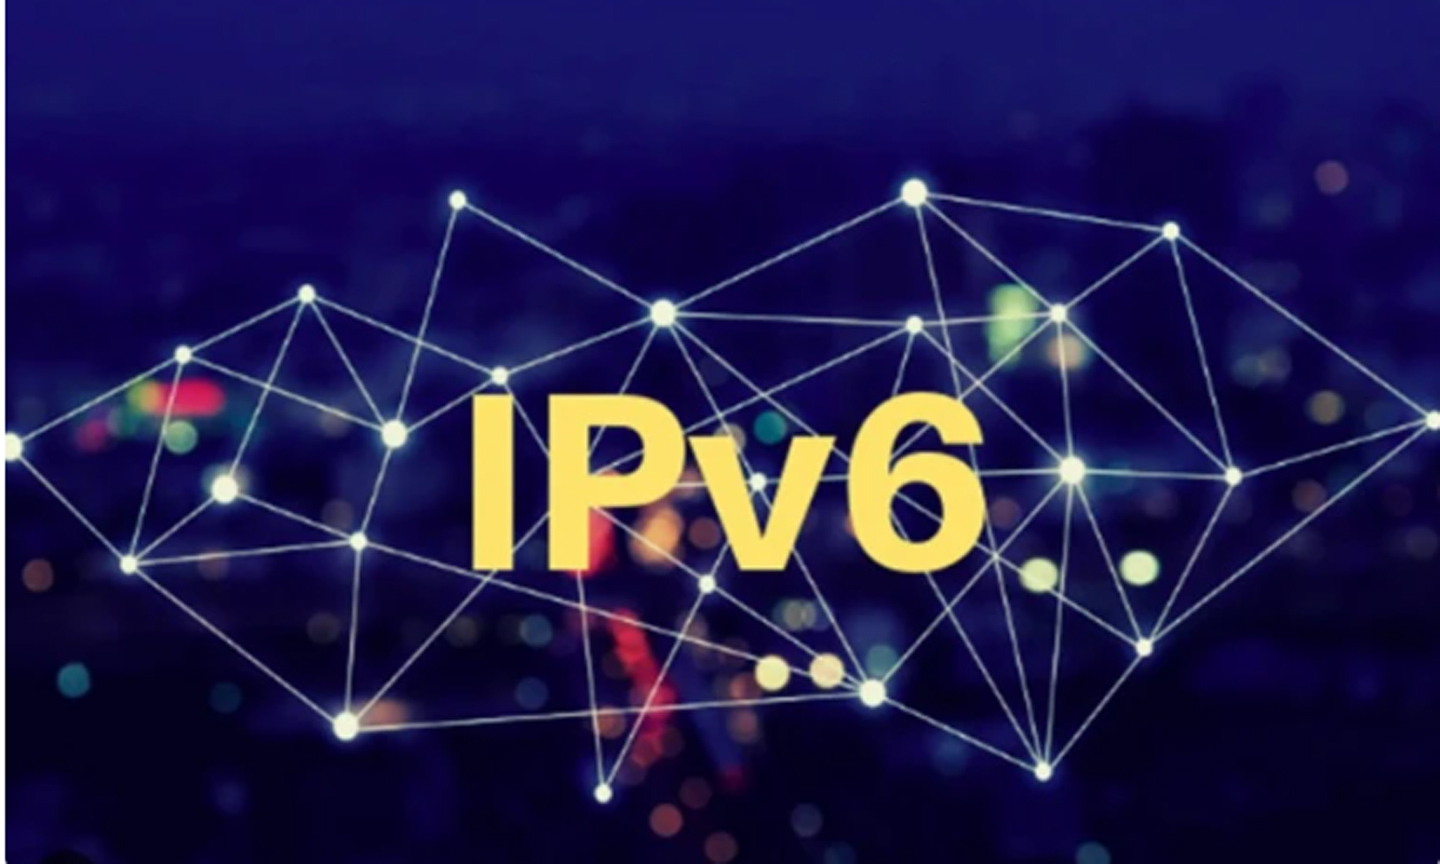 ABO/NDO- The Ministry of Information and Communications has set a target of increasing the usage of Internet Protocol version 6 (IPv6) to 65-80% by the end of this year, bringing Vietnam into the top 8 for IPv6 usage in the world.